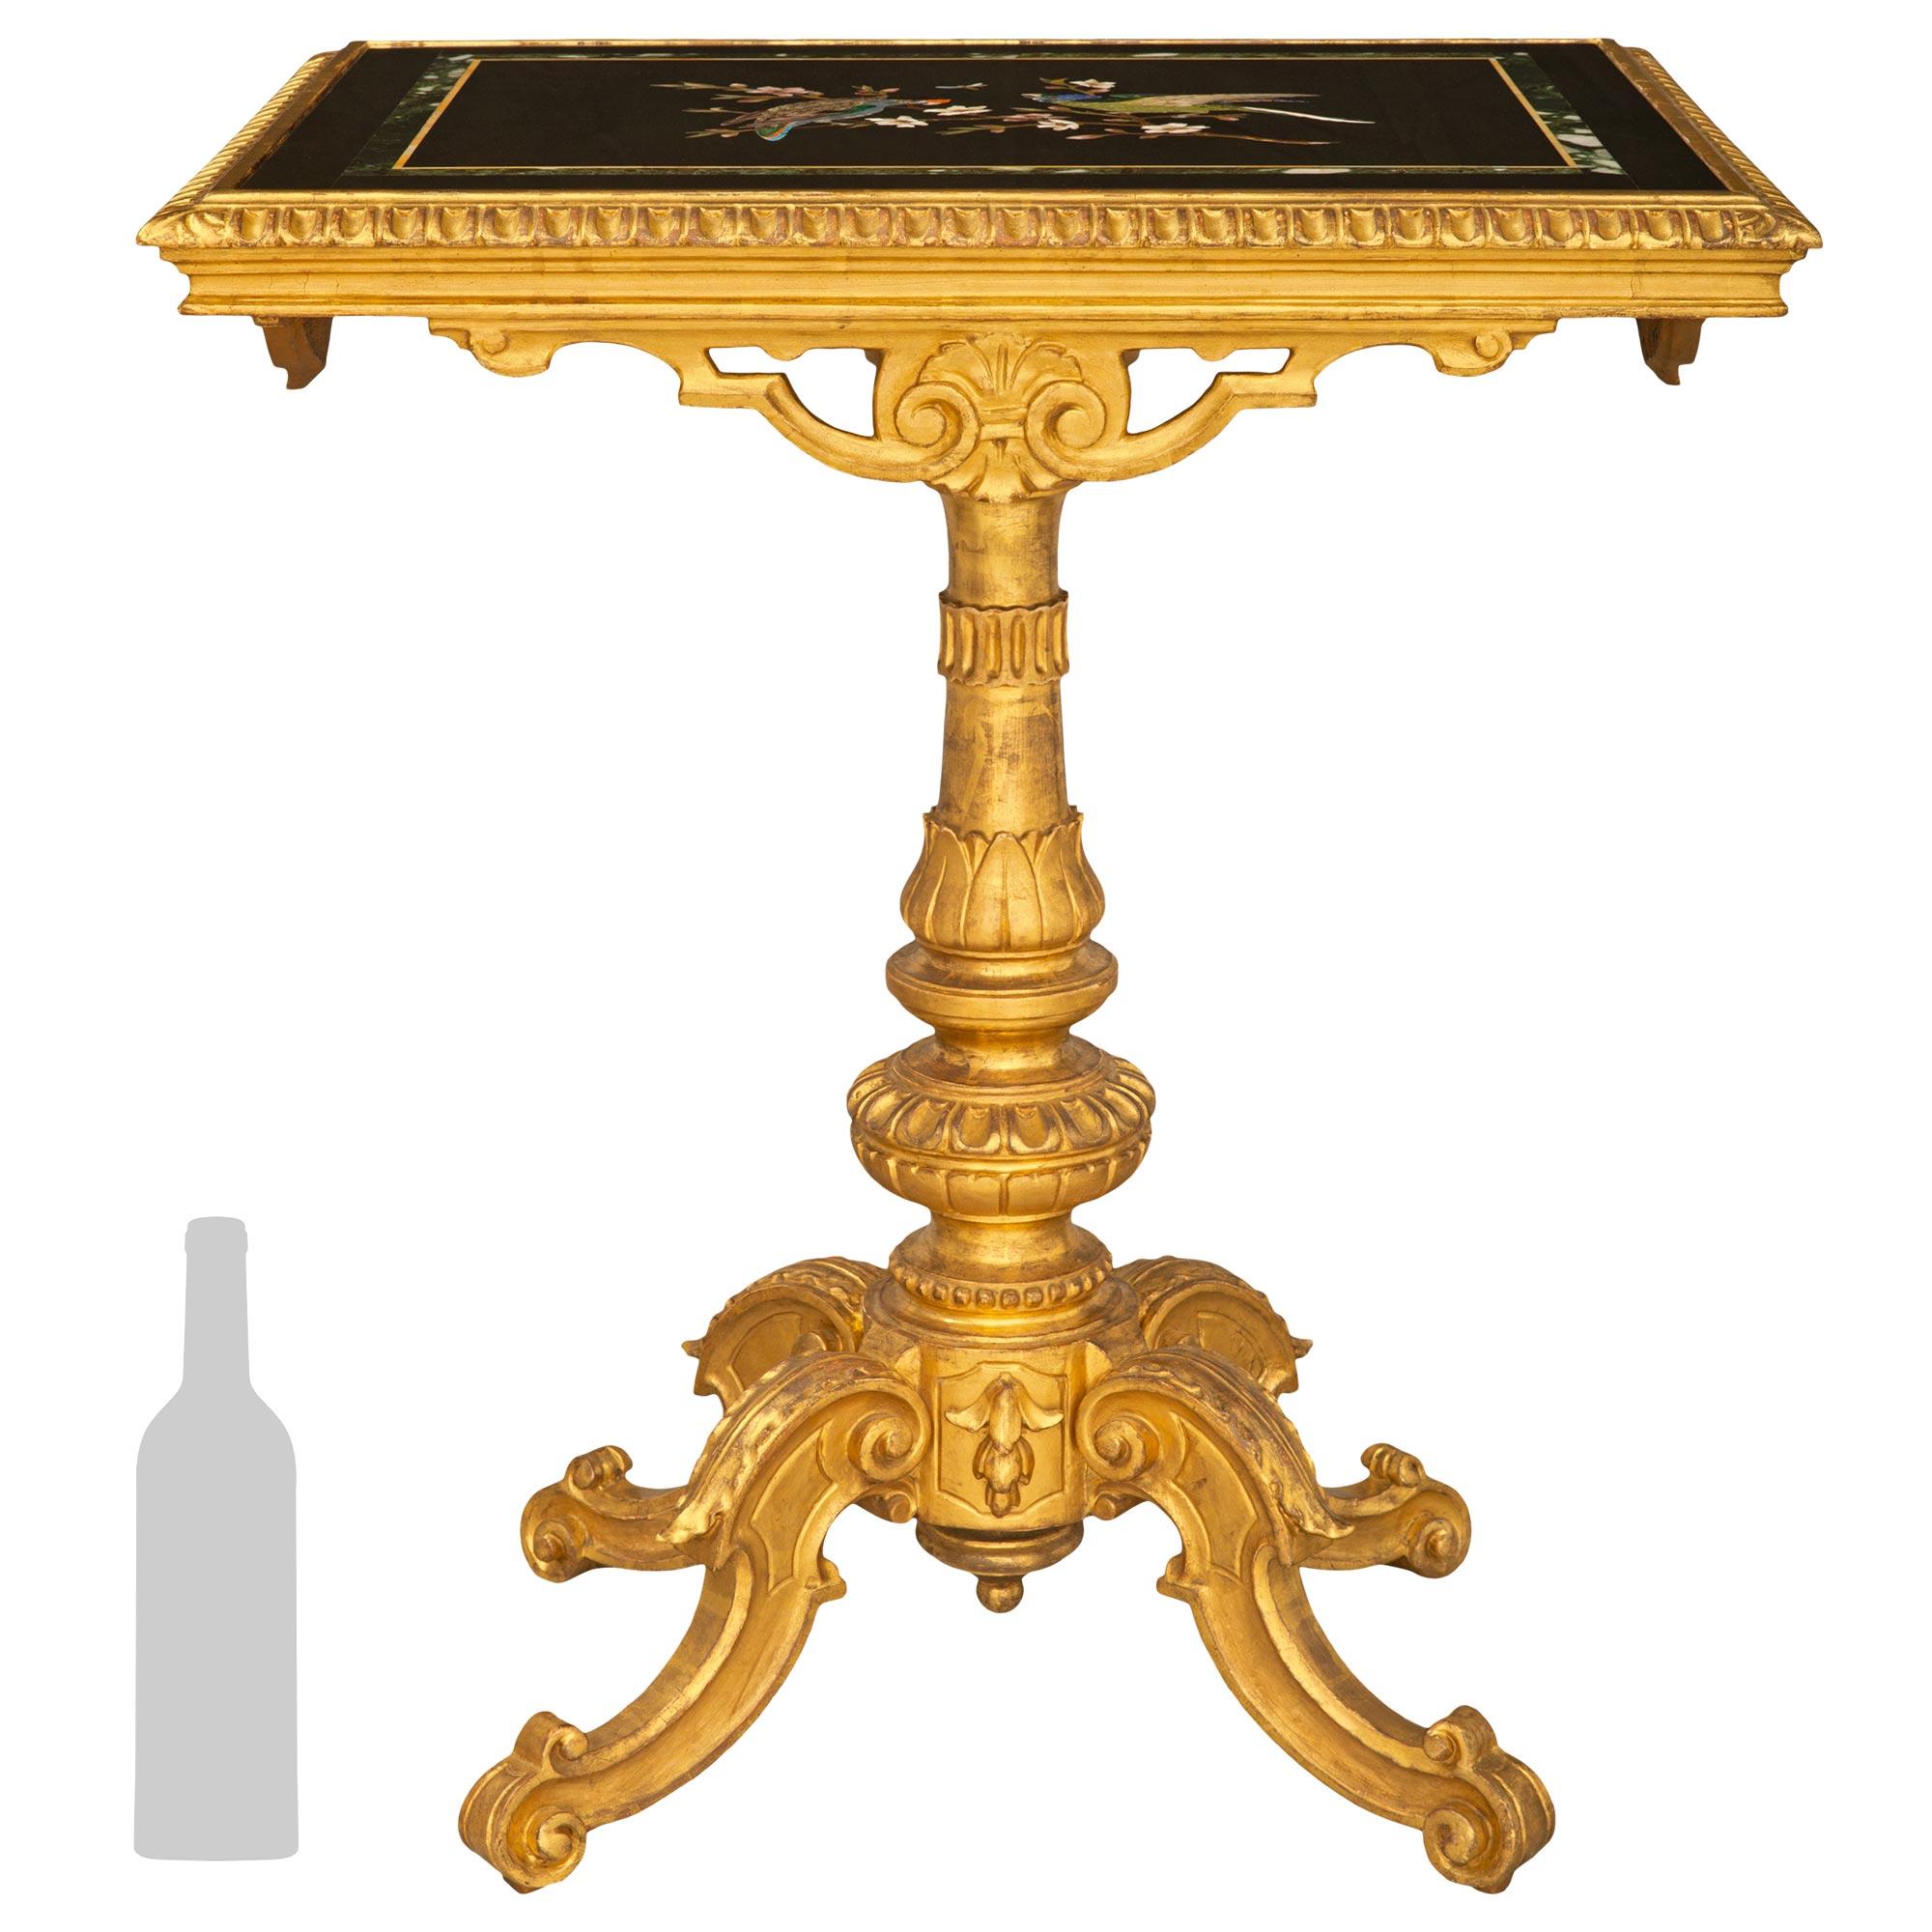 A stunning Italian 19th century Florentine st. Giltwood and Pietra Dura marble side table. The tilt top table is raised by a four scrolled legs with bottom scrolls and attractive elongated top acanthus leaves. The central column supporting the top